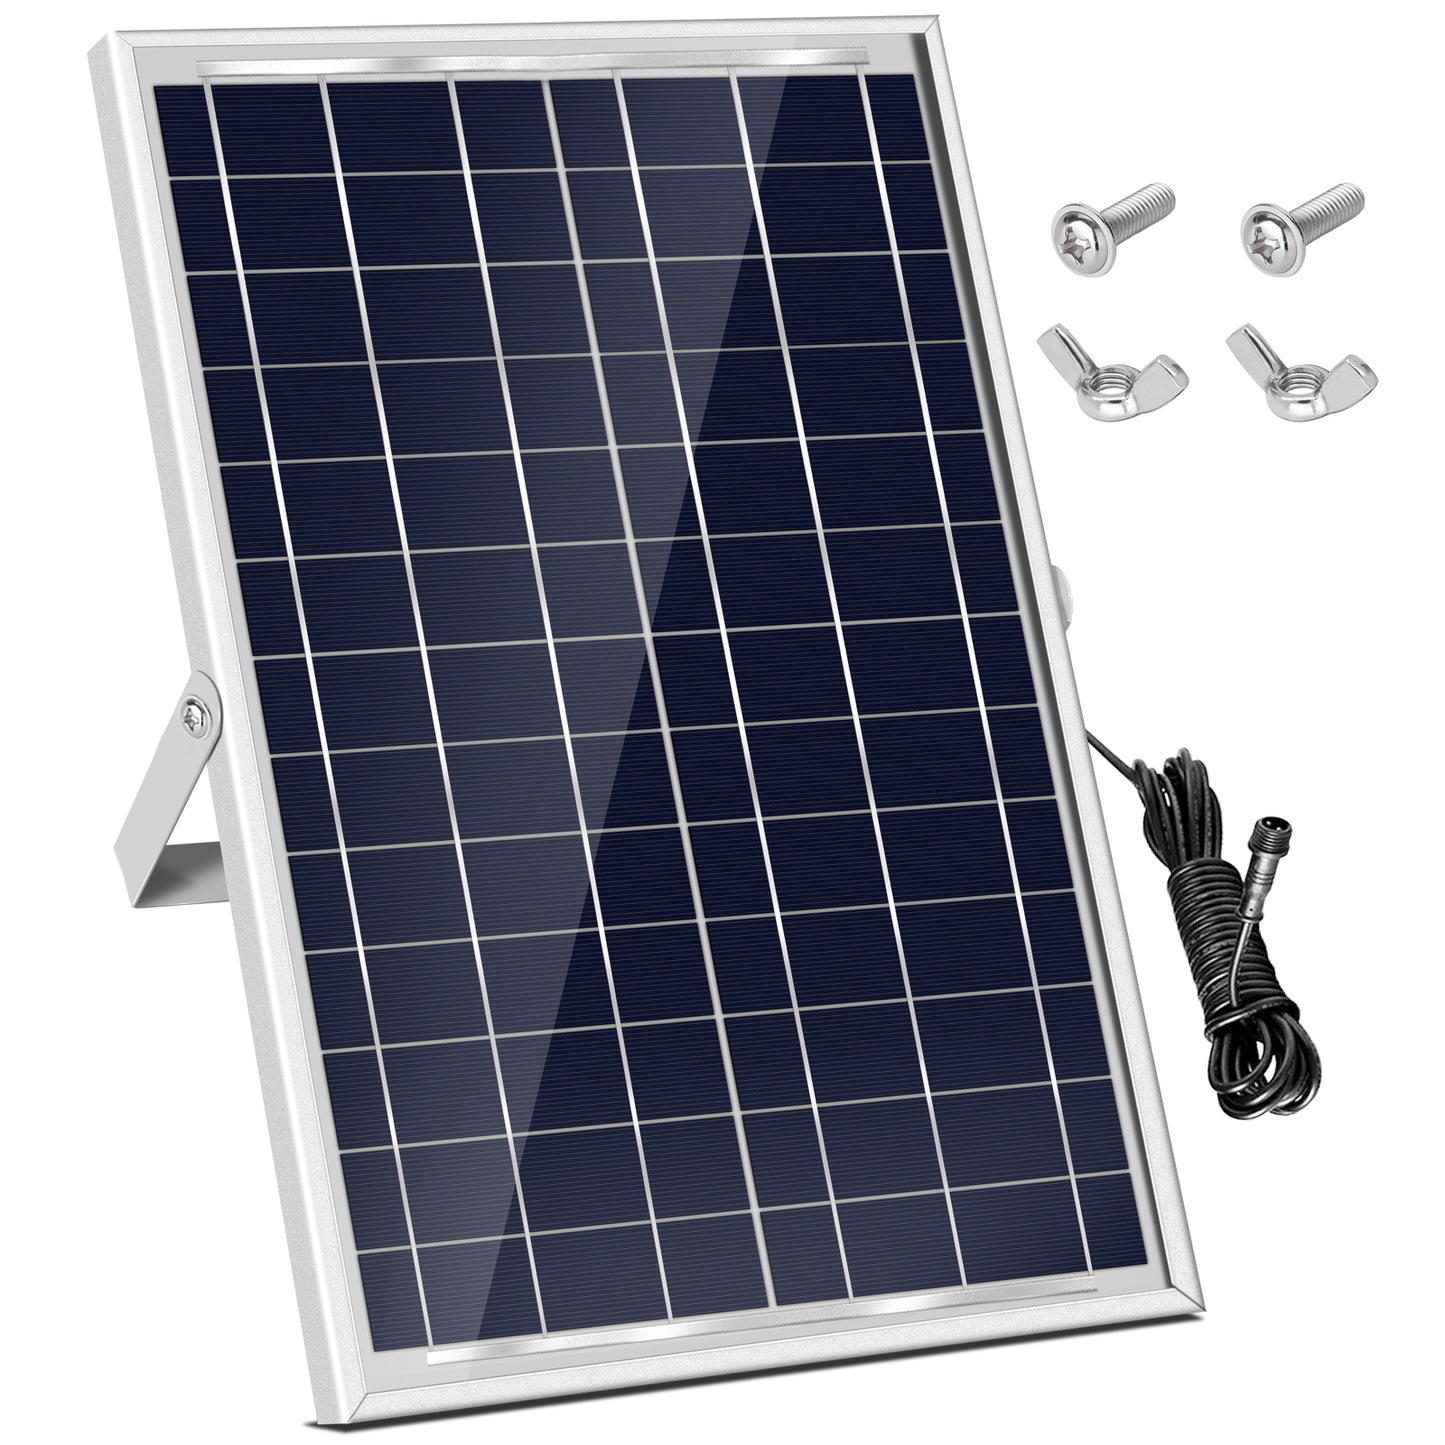 HARTOMPET Solar Panel Accessory Empower Coop with 6W 6V Charging - Easy Install, Durable Design and Efficient Energy, Harness Sustainable Power for Poultry Protection